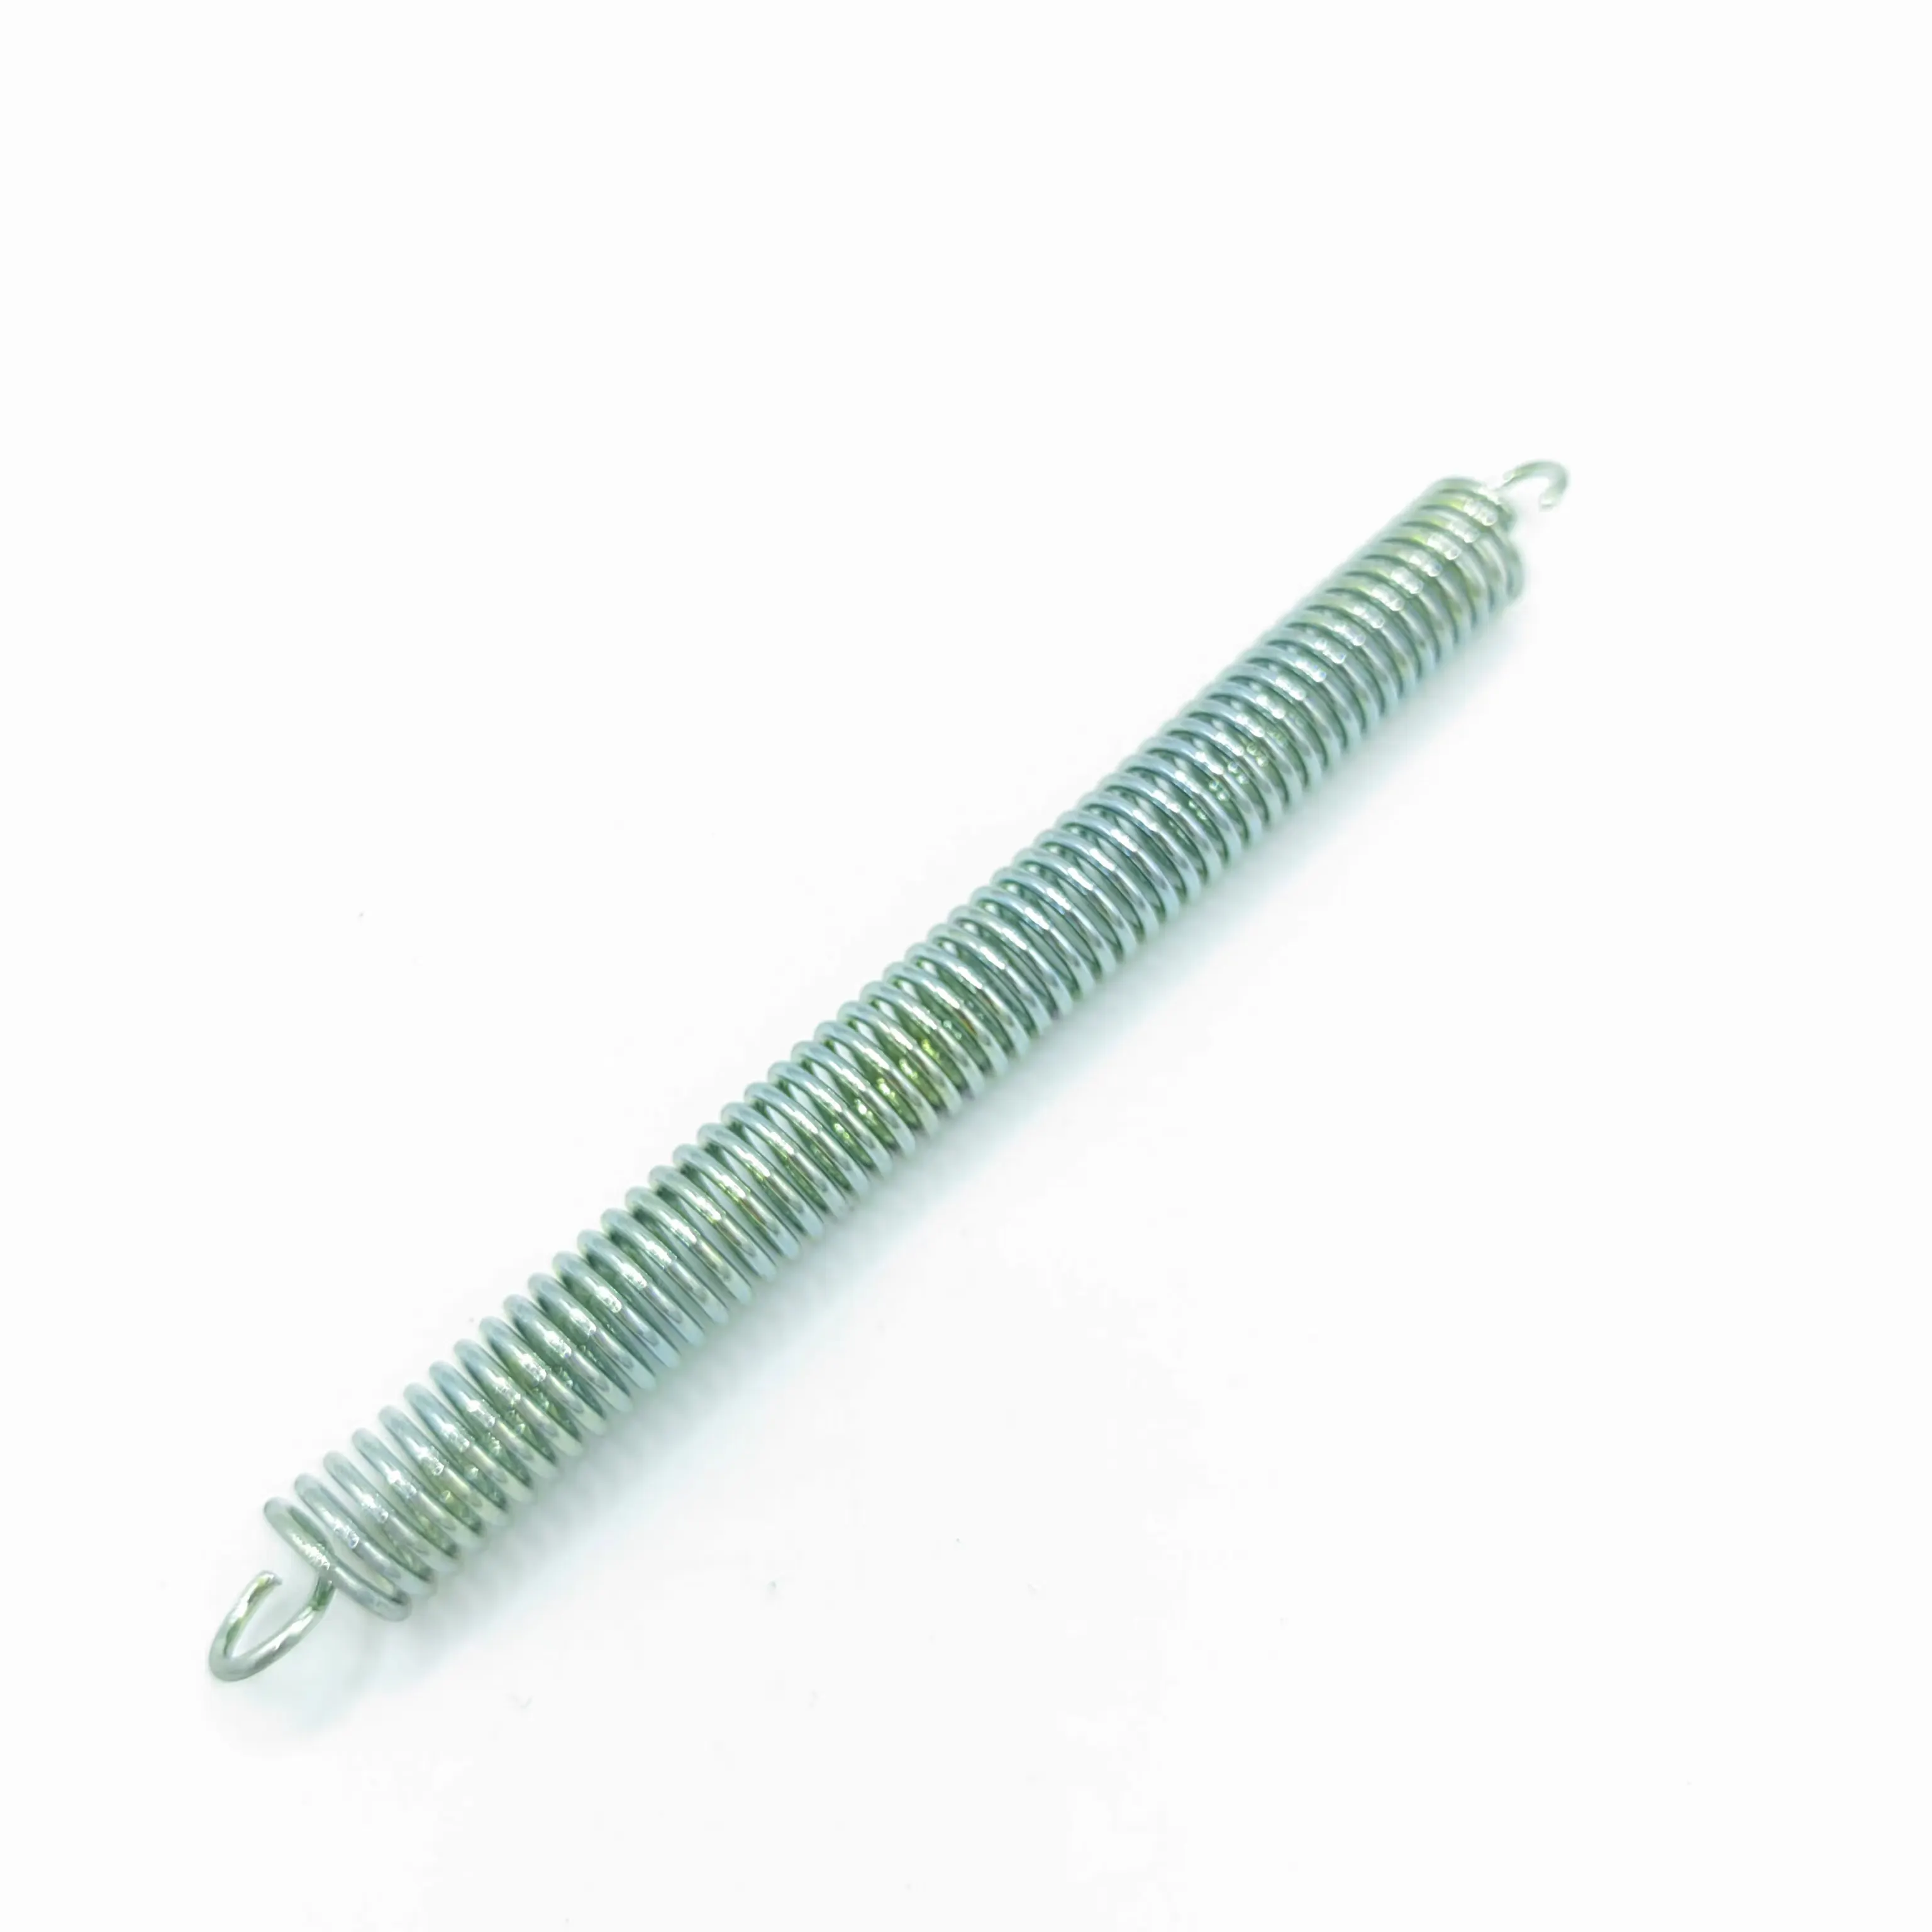 Professional spring manufacturer accepts custom colored galvanized trampoline springs for metal tension springs